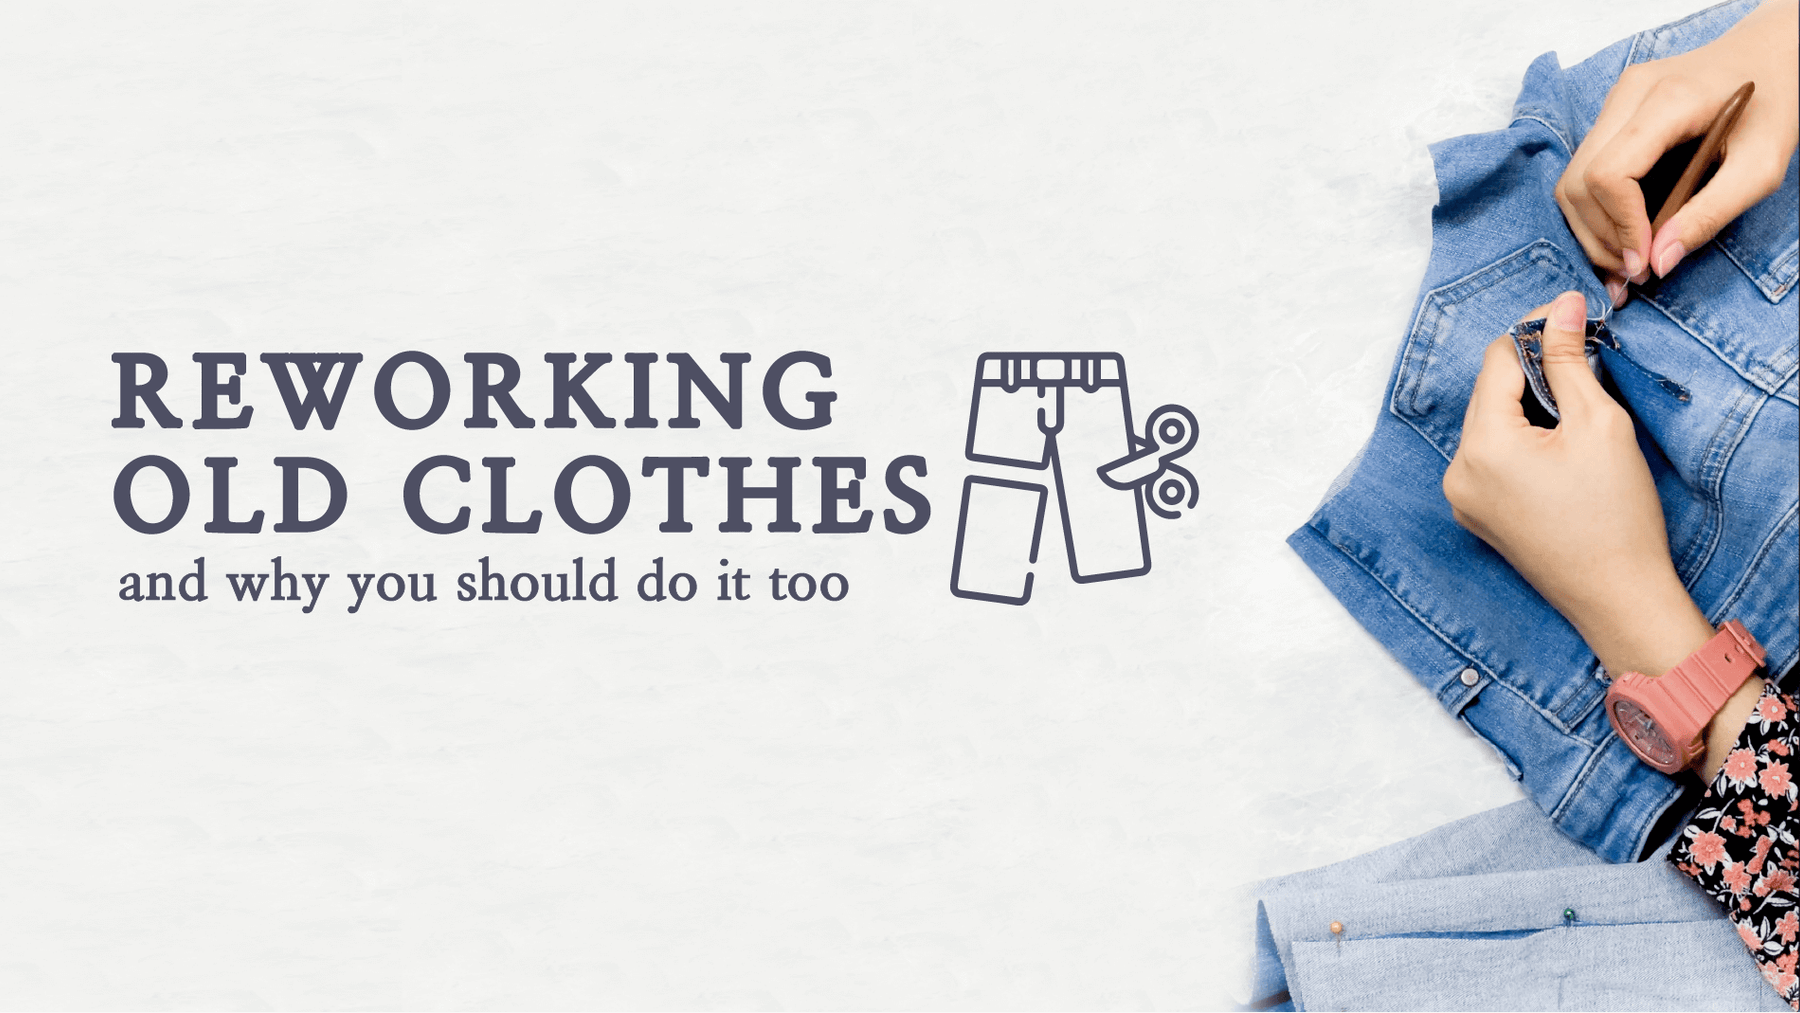 Reworking old clothes and why you should do it too